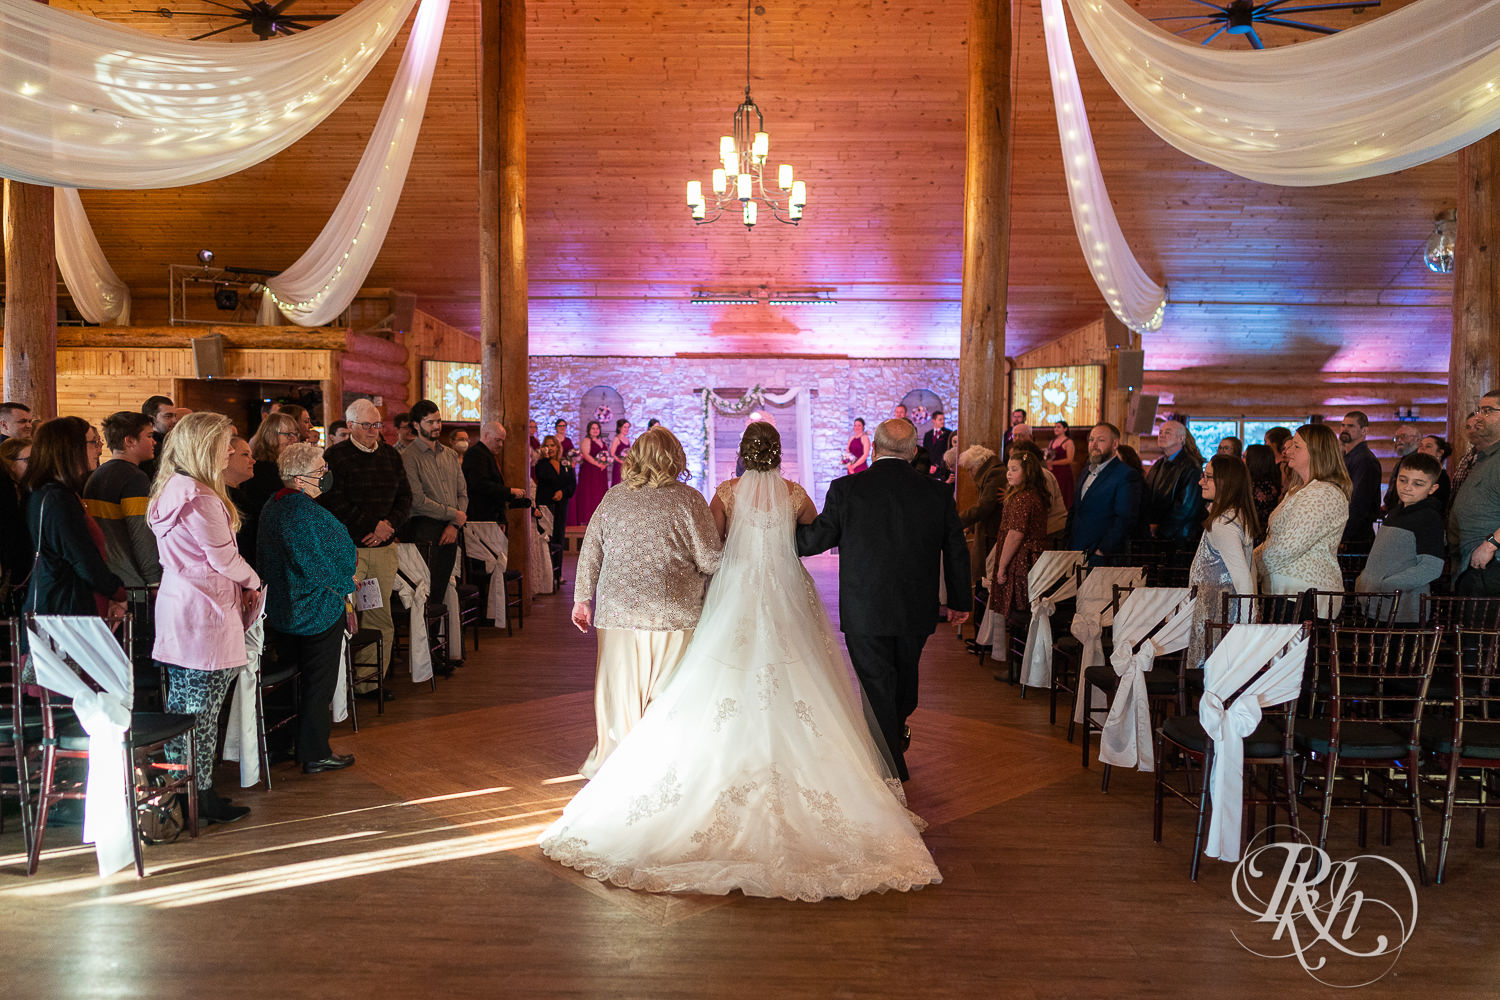 Bride walking down aisle with parents at Glenhaven Events in Farmington, Minnesota.